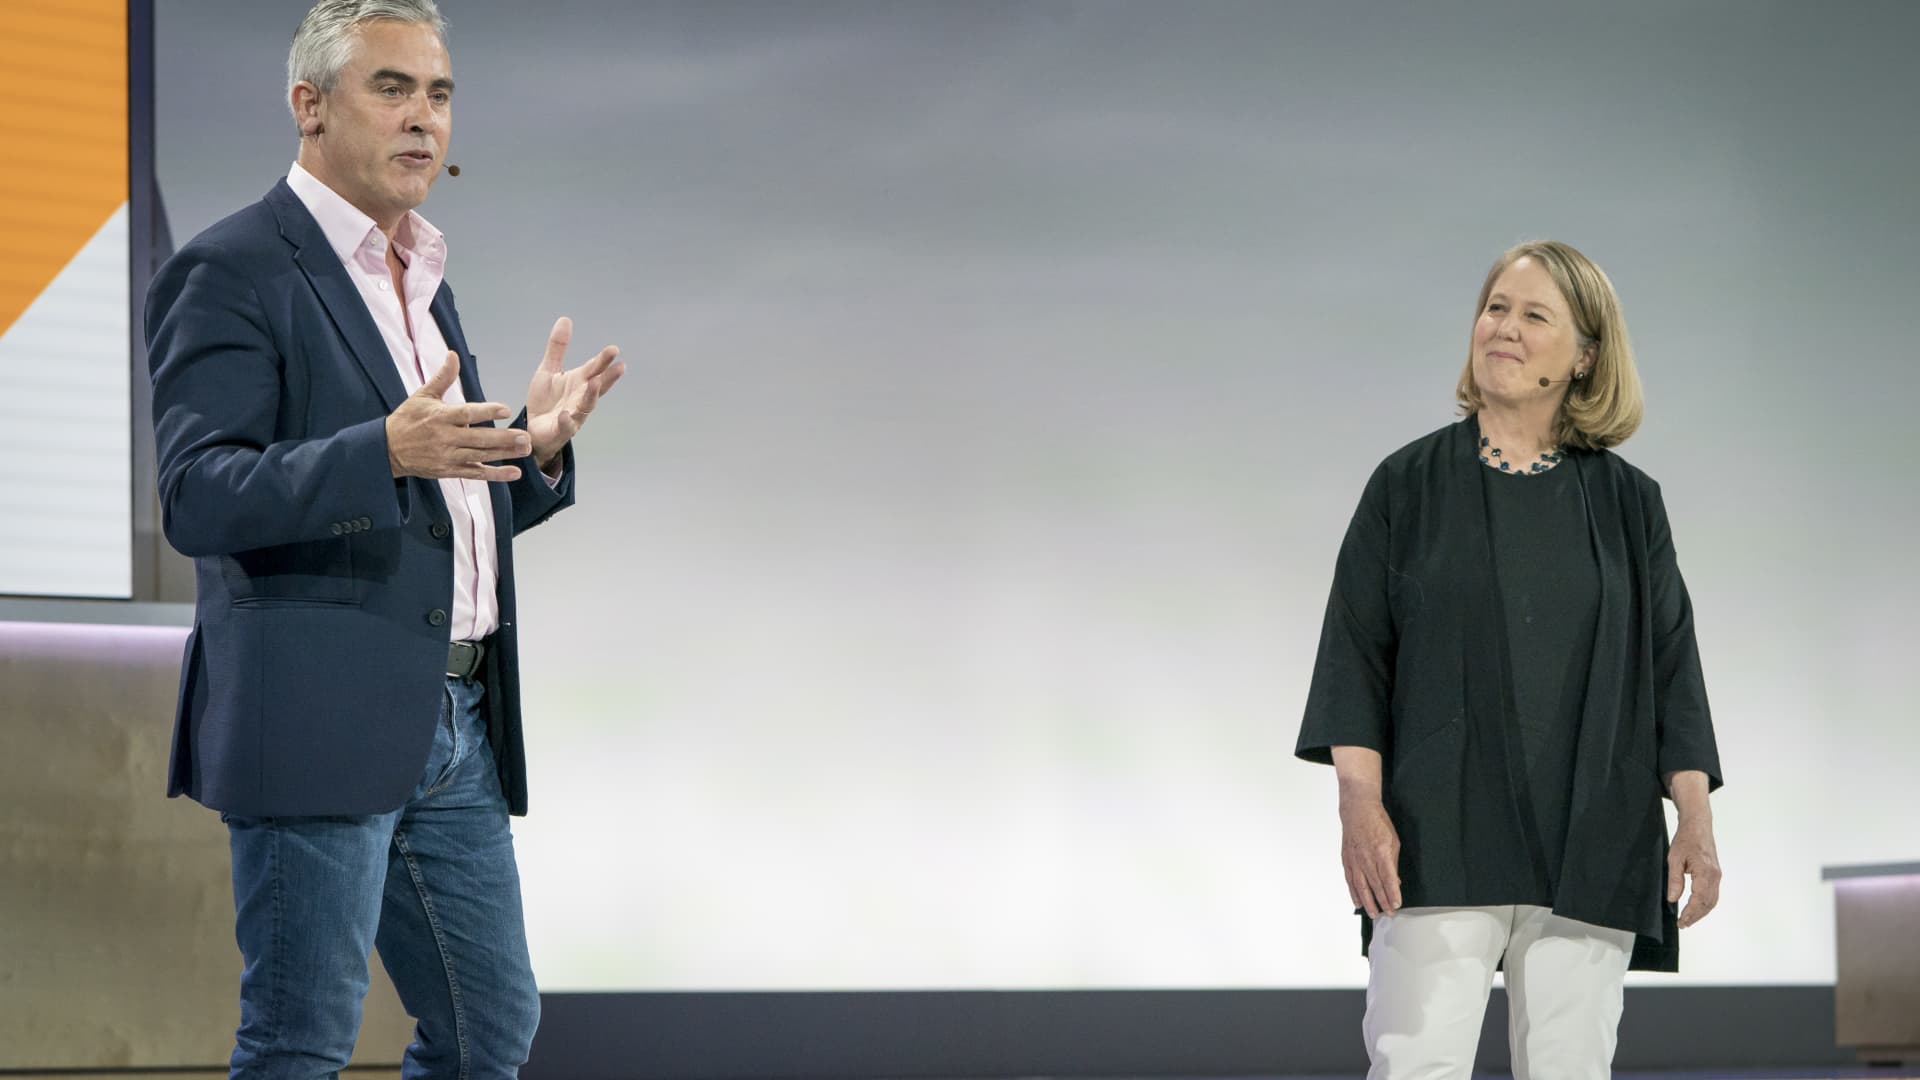 Mike McNamara, chief information officer at Target, left, speaks as Diane Greene, then CEO of cloud services at Google, listens during the Google Cloud Next event in San Francisco on July 24, 2018.